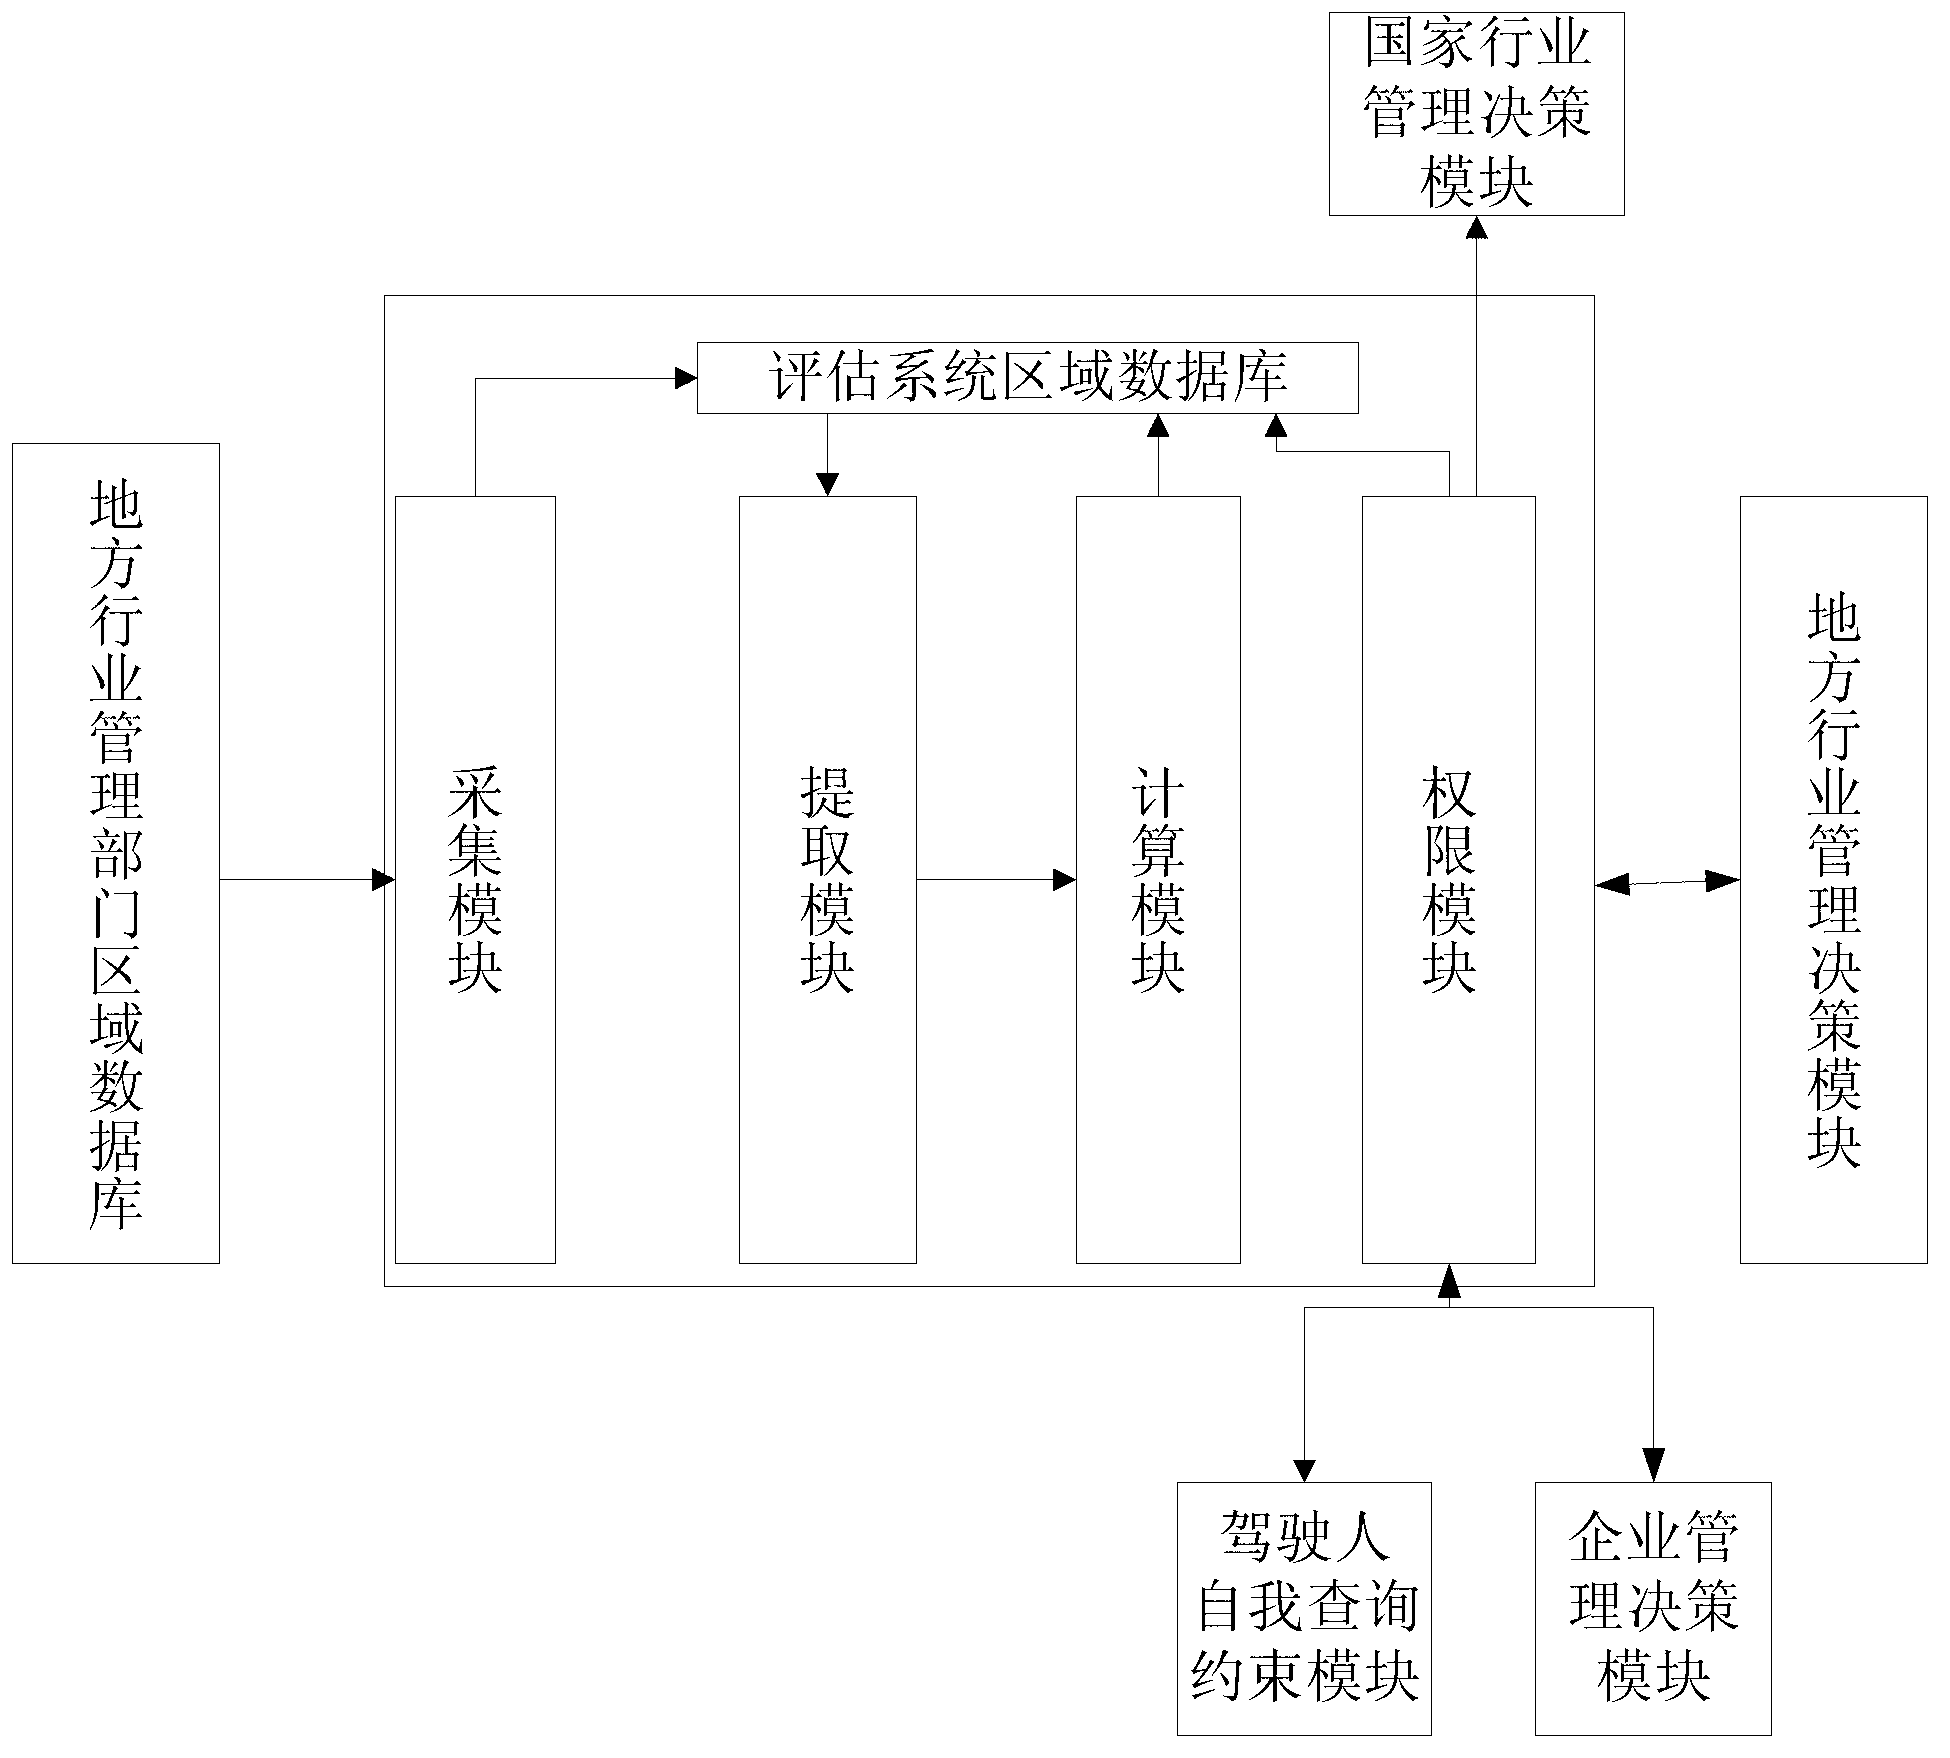 System for evaluating commercial vehicle driver